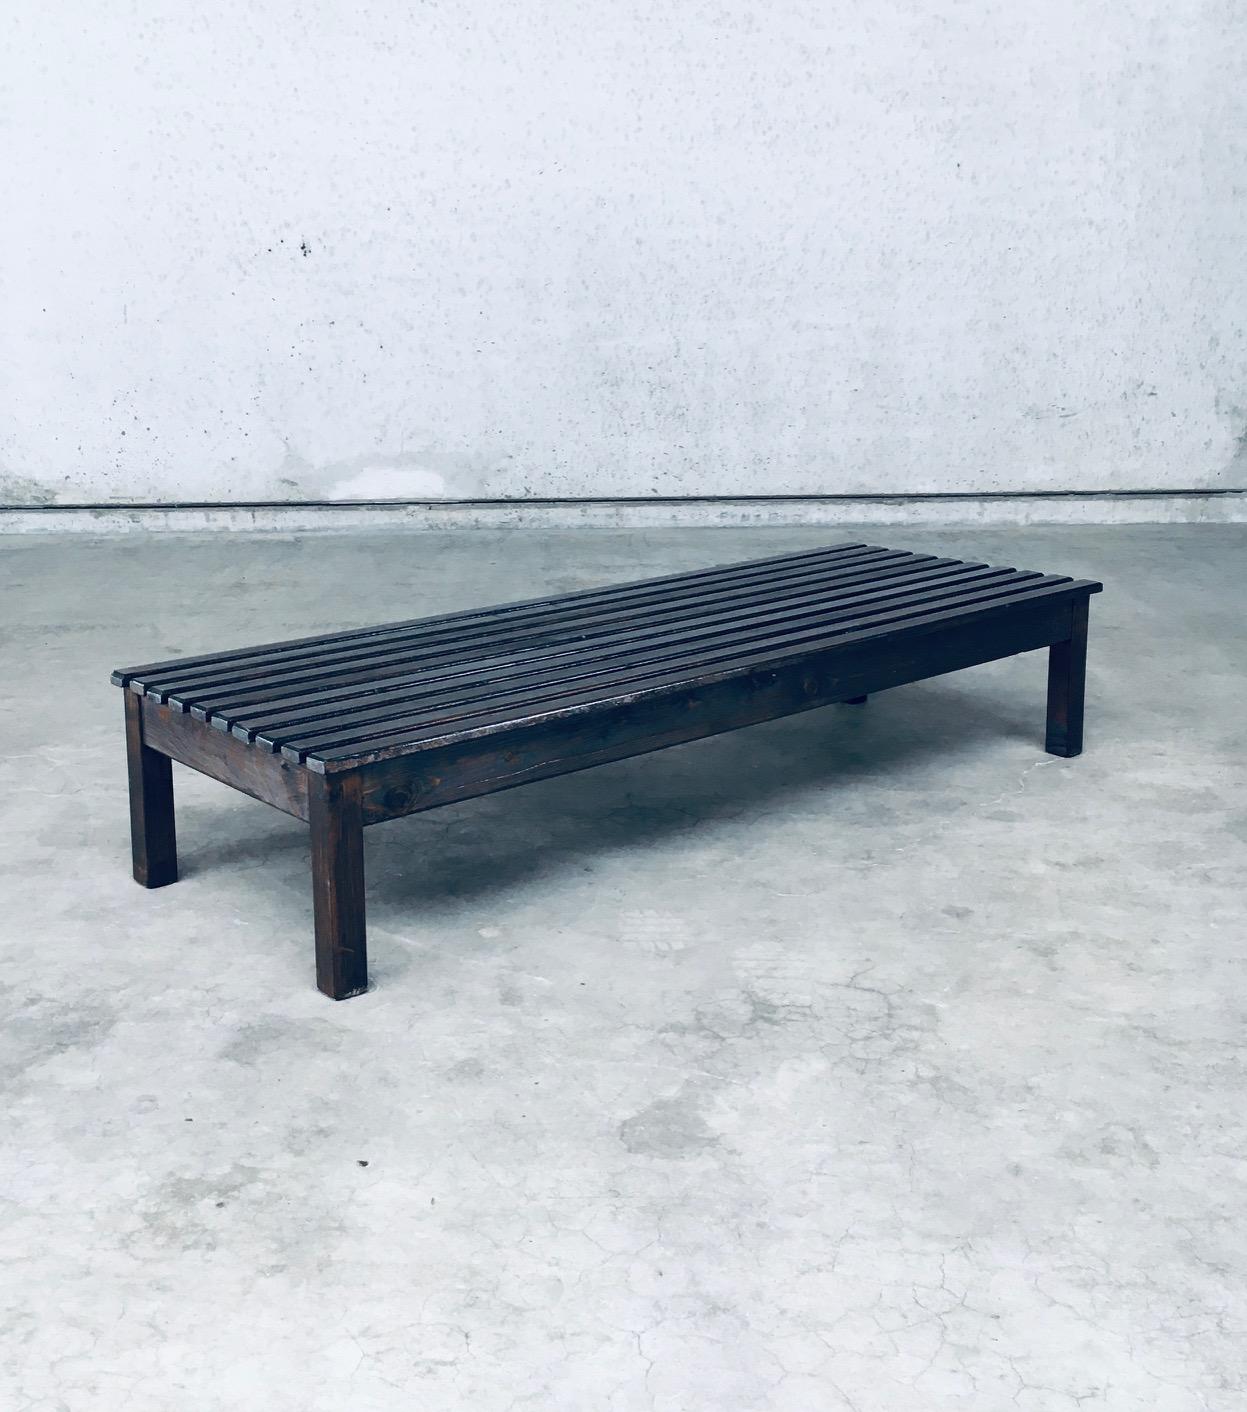 Vintage Midcentury Period Design Darck Stained Pine Low Slat Bench or Side Table. Made in the 1960's. No maker markings or references found. Dark stained pine wooden construction. This comes in very good condition. Measures 36cm x 178,5cm x 63cm.